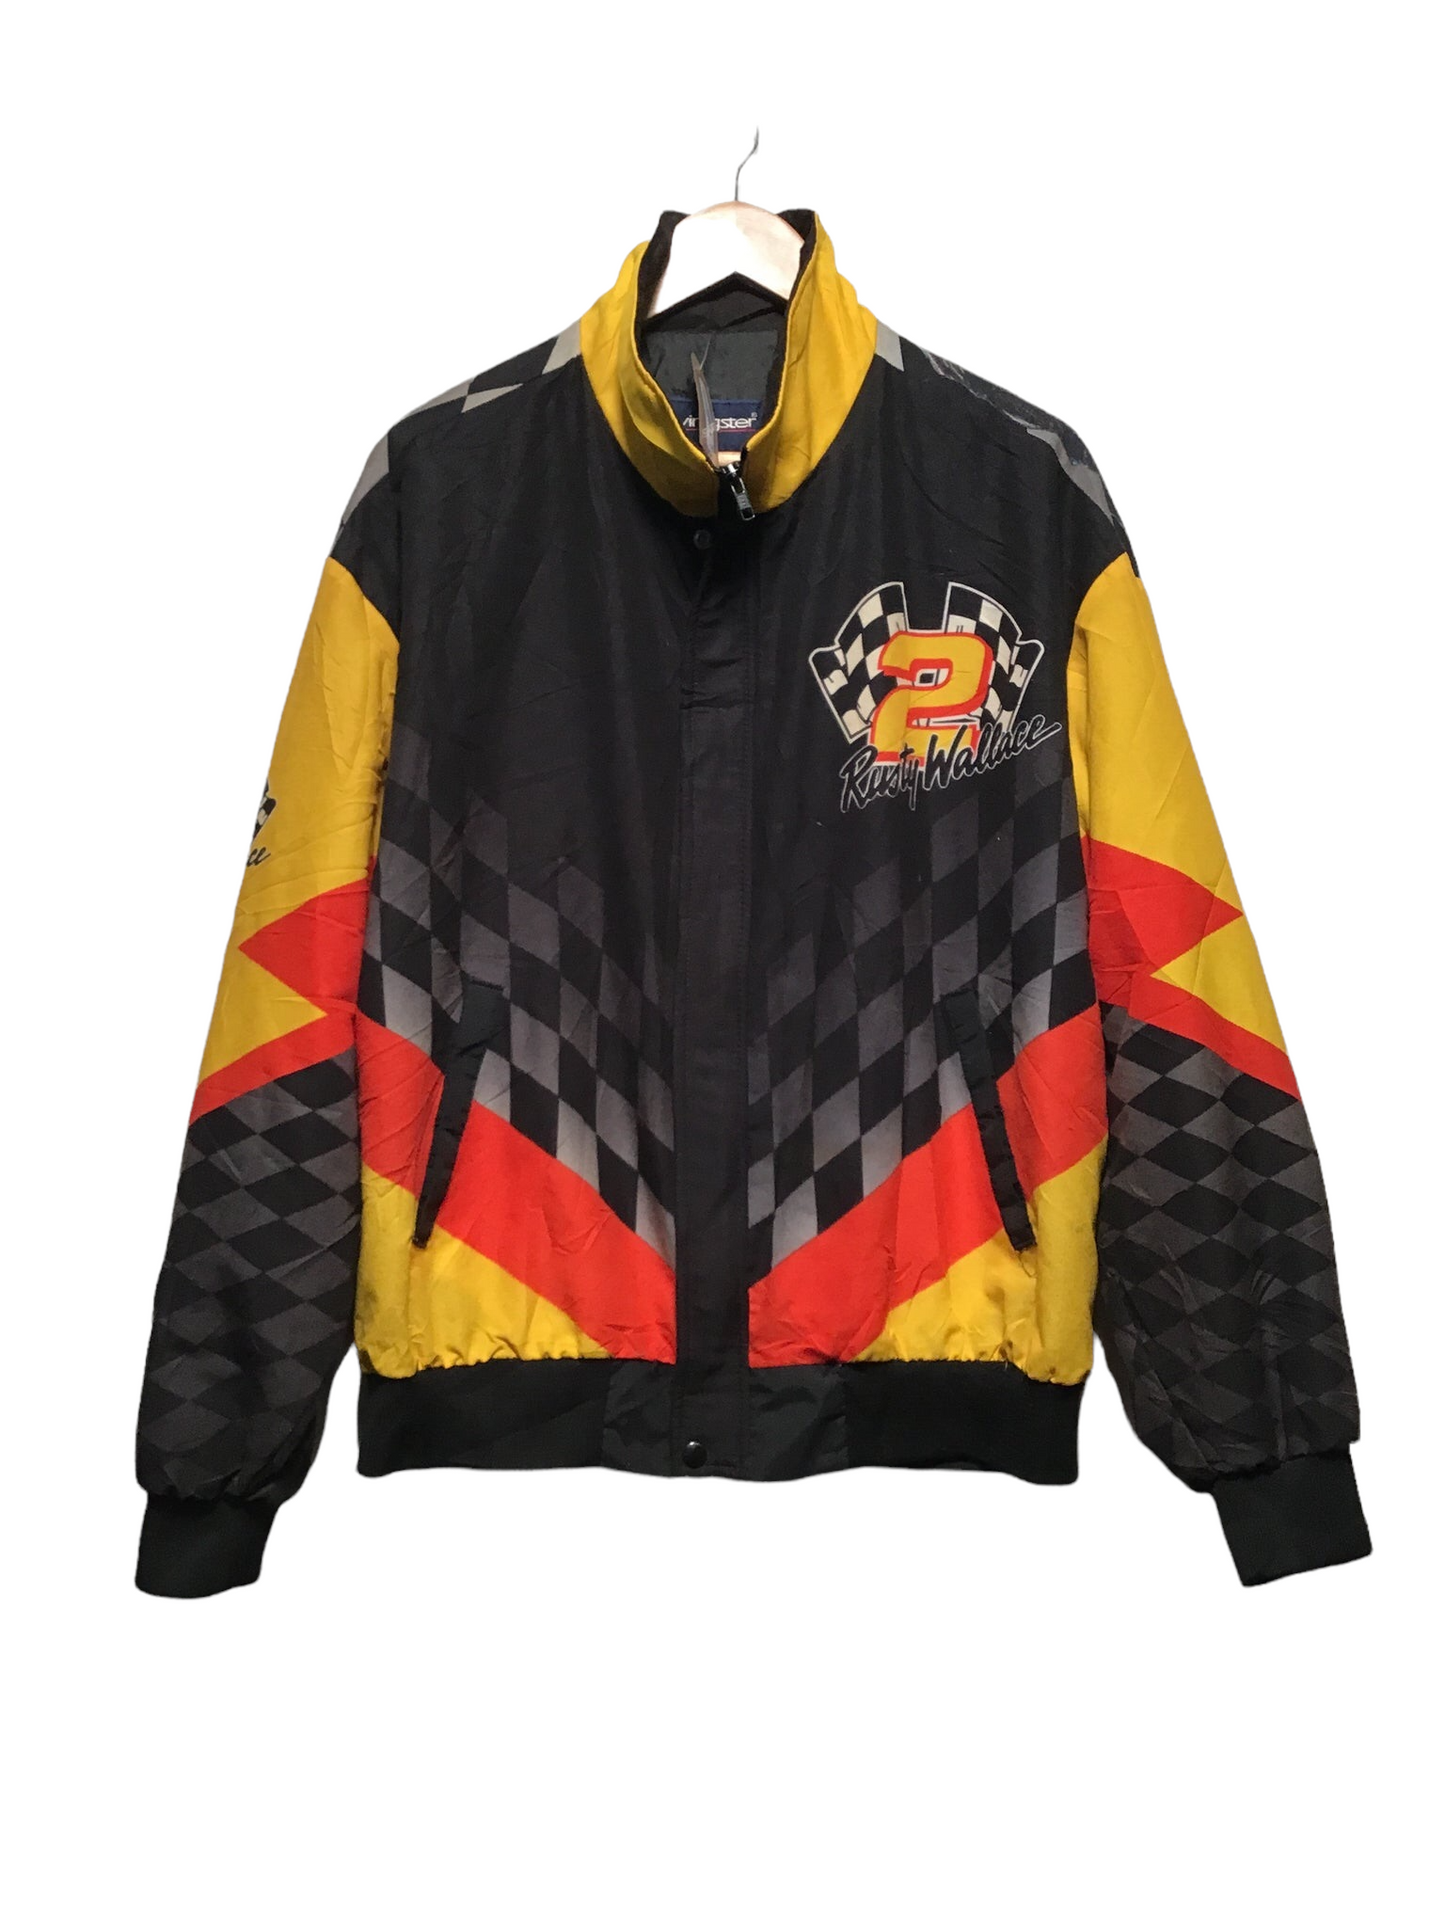 Rusty Wallace Racing Bomber Jacket (Size L)